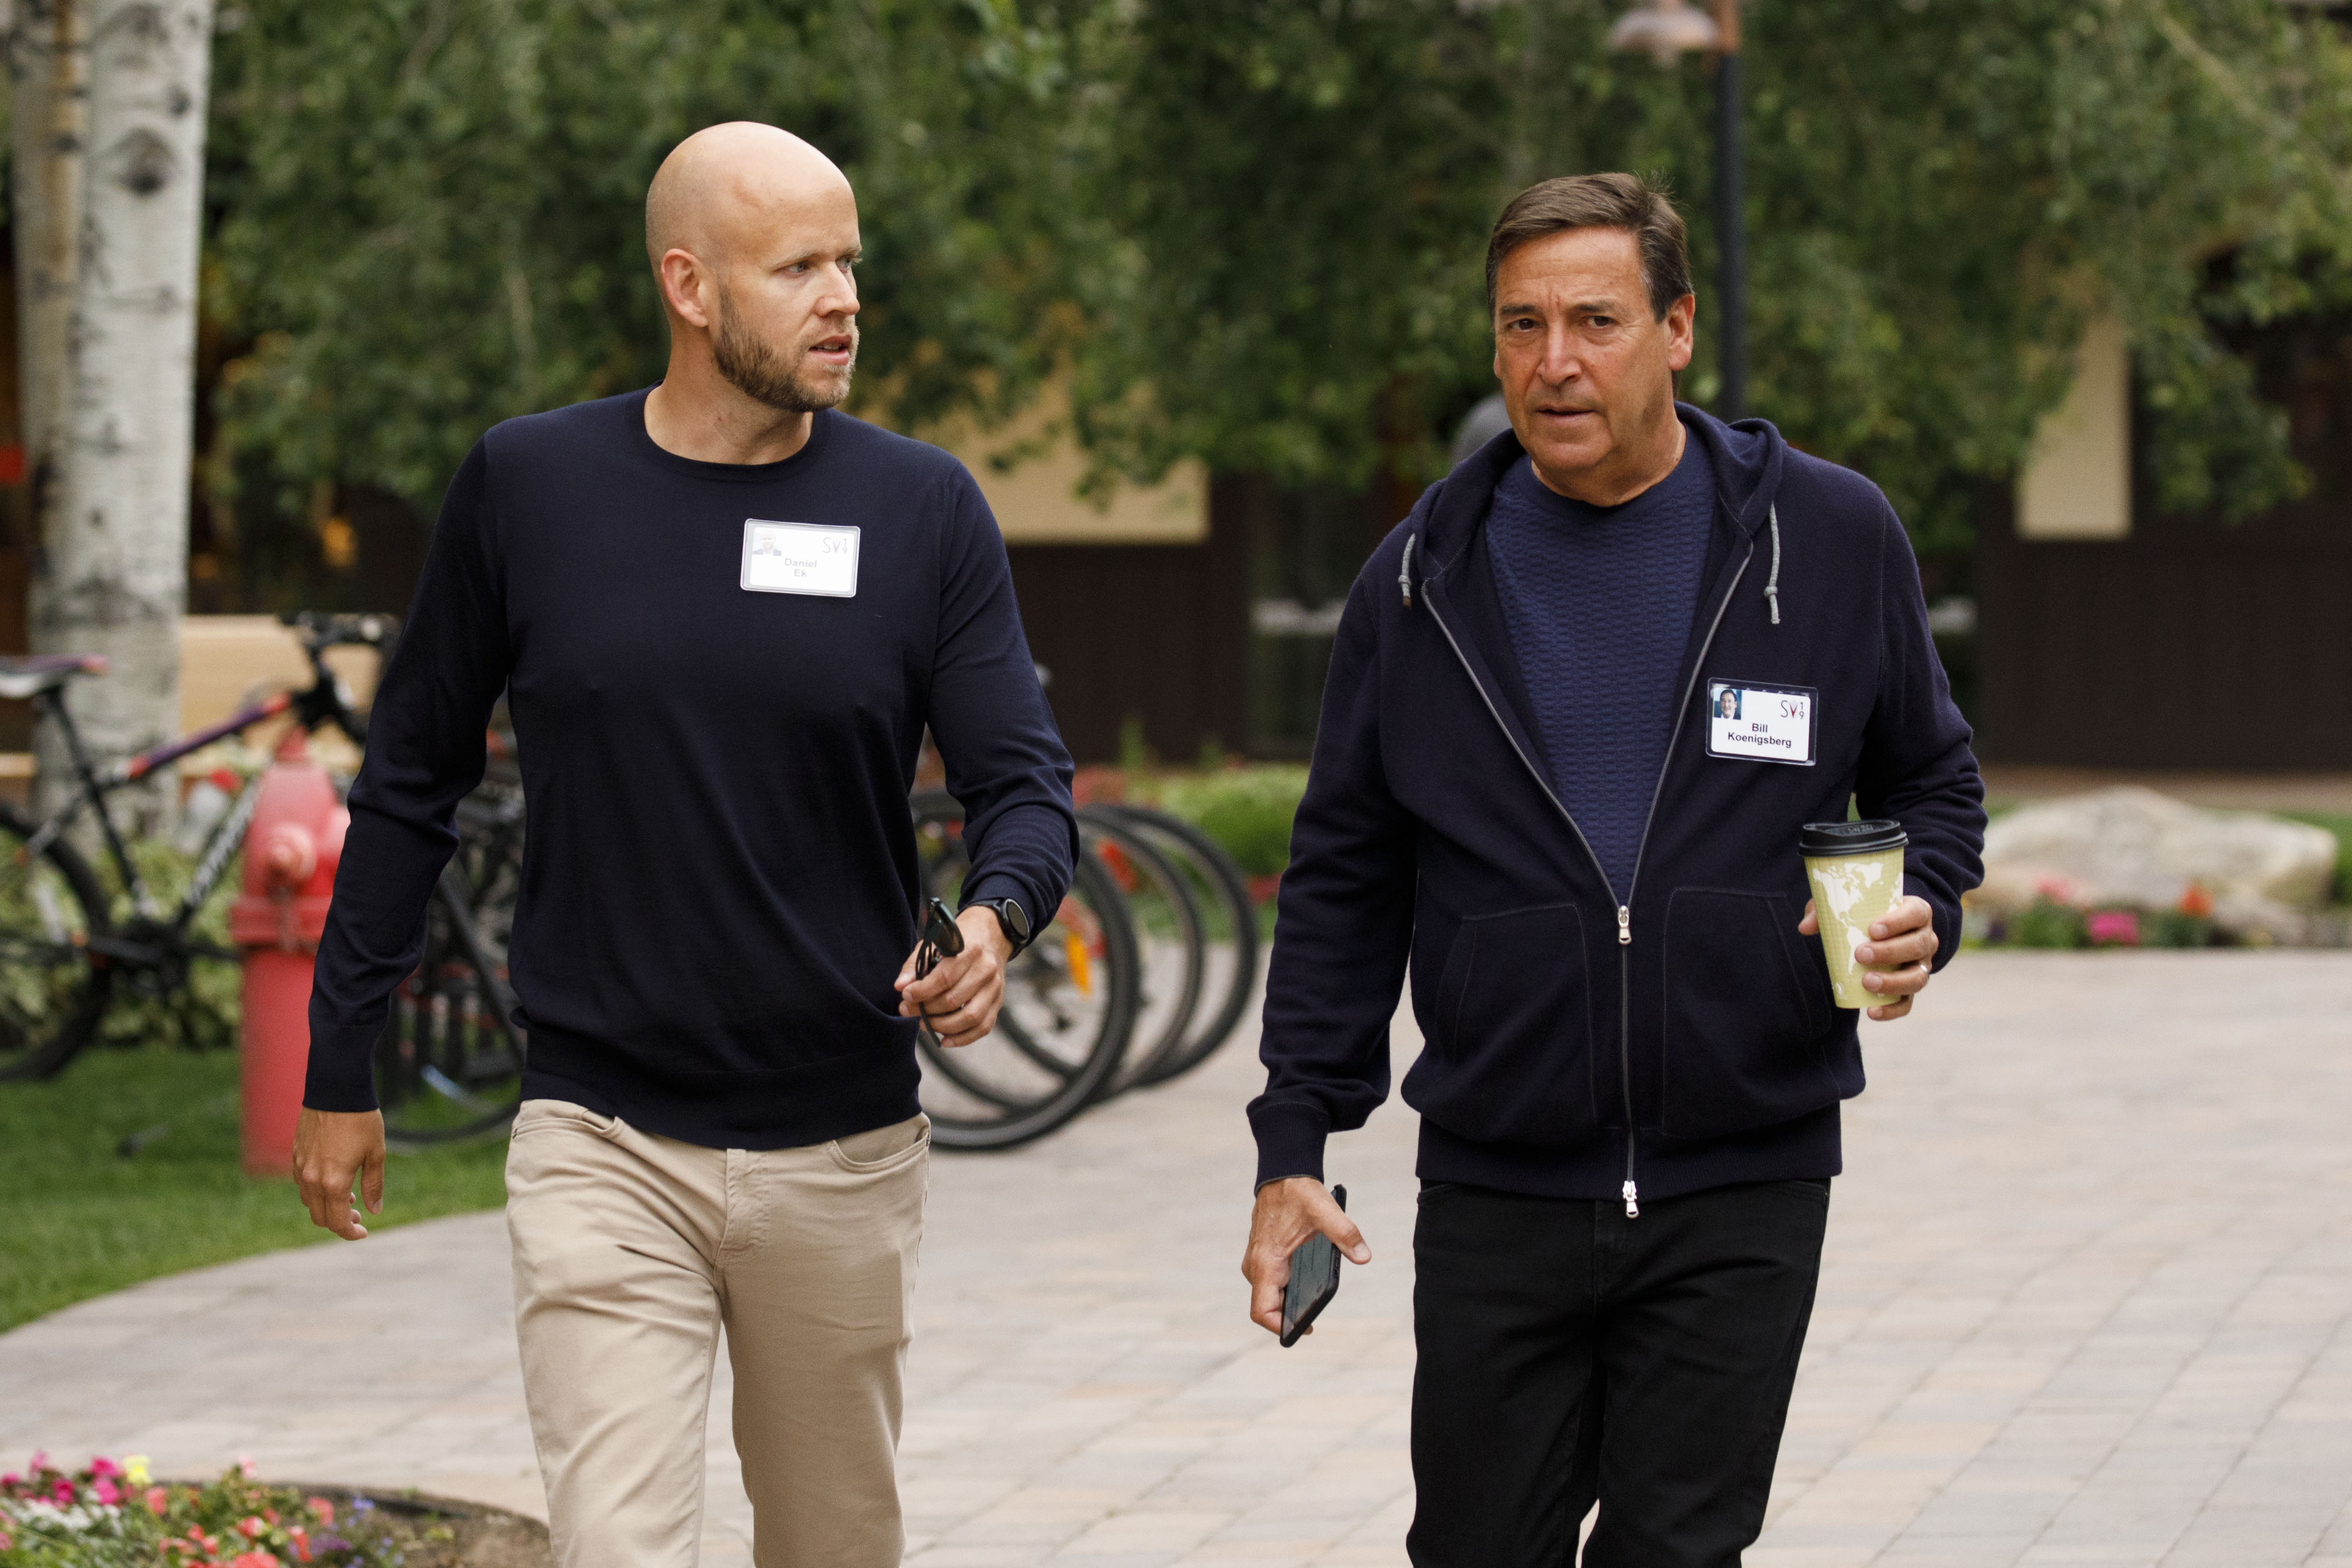 Daniel Ek, co-founder and chief executive officer of Spotify Technology SA, left, and Bill Koenigsberg, founder and chief executive officer of Horizon Media Inc., arrive for the morning session of the Allen & Co. Media and Technology Conference in Sun Valley, Idaho, U.S., on Wednesday, July 10, 2019. The 36th annual event gathers many of America's wealthiest and most powerful people in media, technology, and sports.